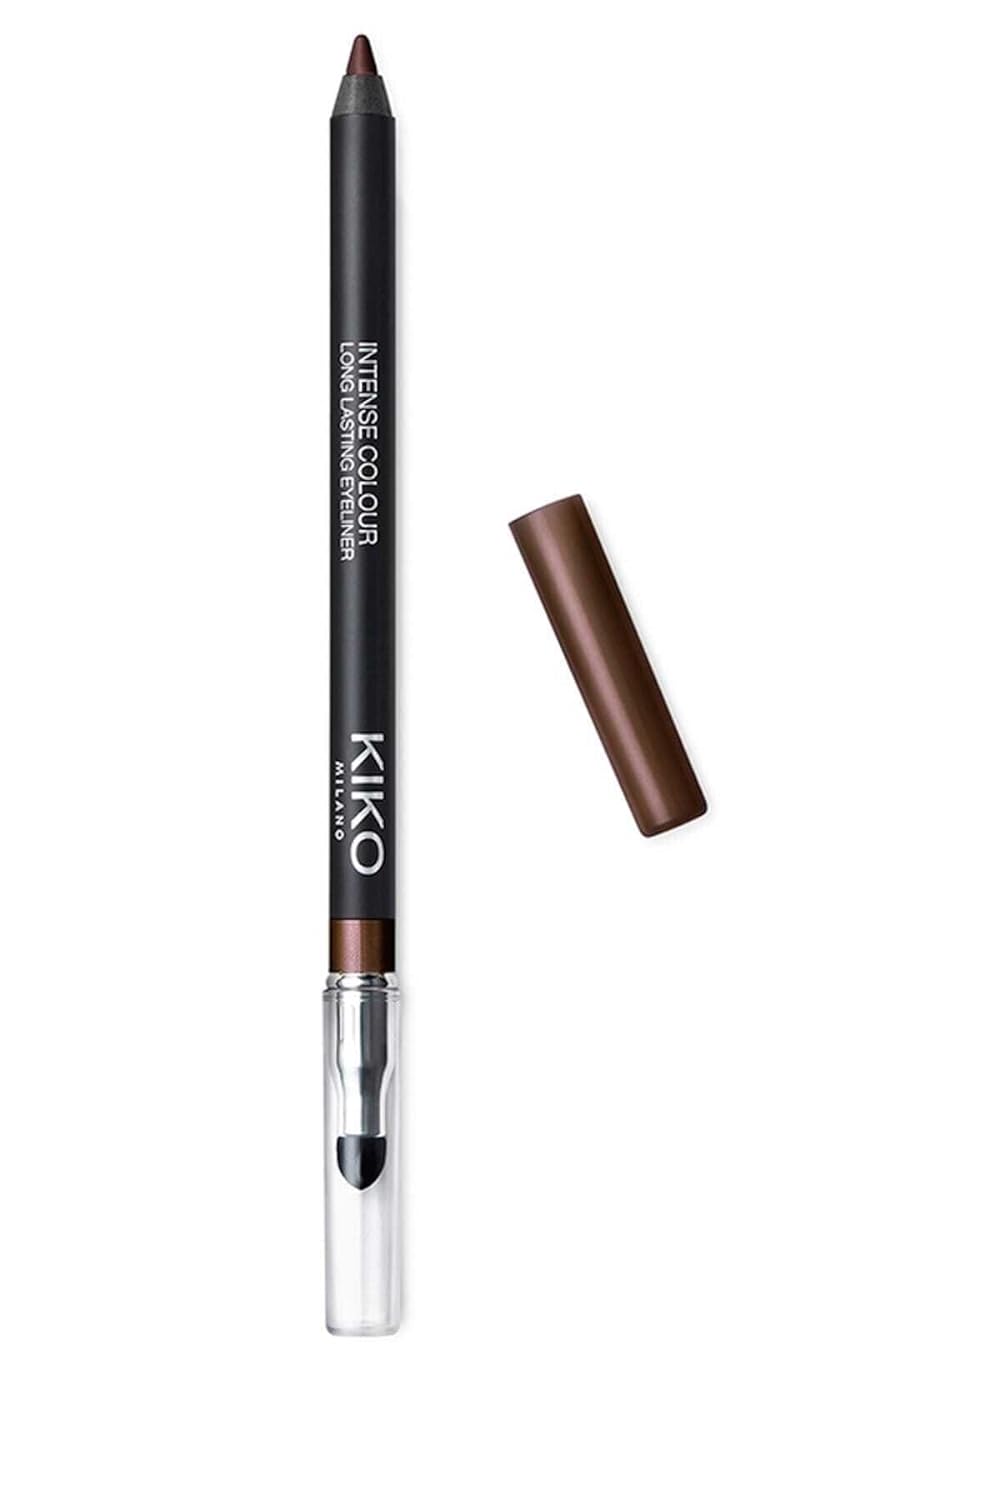 Kiko MILANO - Intense Colour Long Lasting Eyeliner 04 Intense and smooth-gliding outer eye pencil with long wear